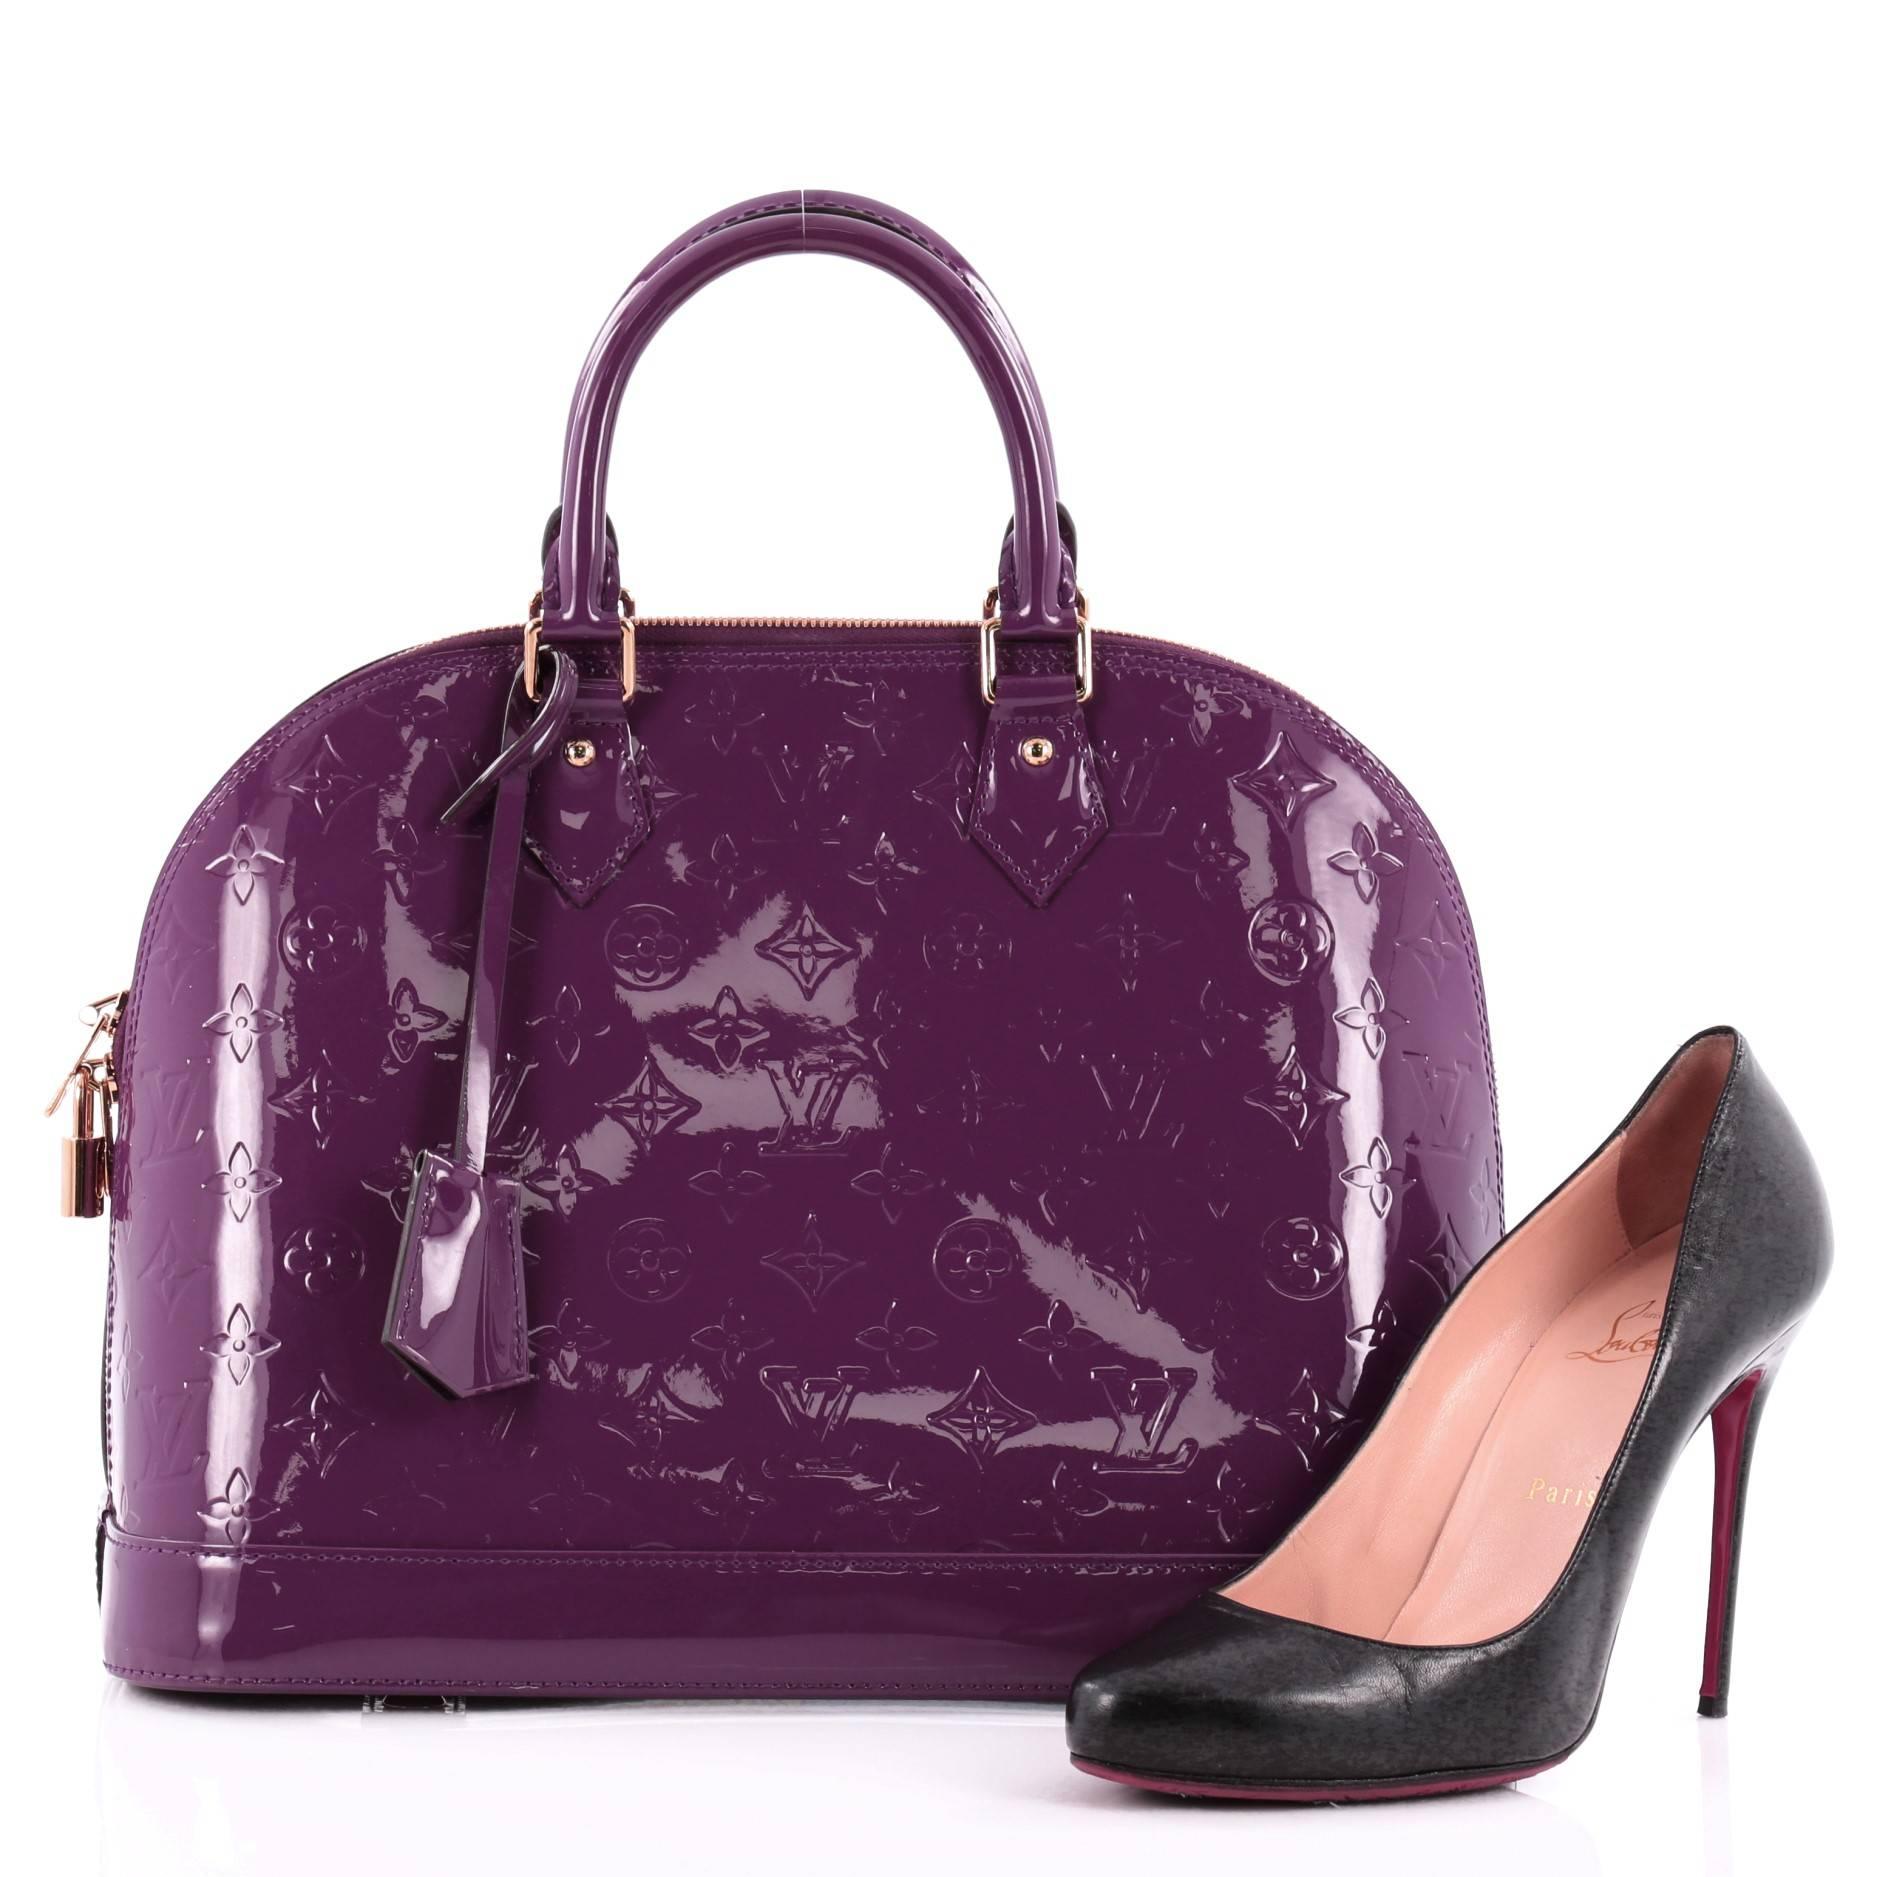 This authentic Louis Vuitton Alma Monogram Vernis MM is a fresh and elegant spin on a classic style that is perfect for summer. Crafted from Louis Vuitton's glossy amethyste purple monogram vernis patent leather, this bag features dual-rolled